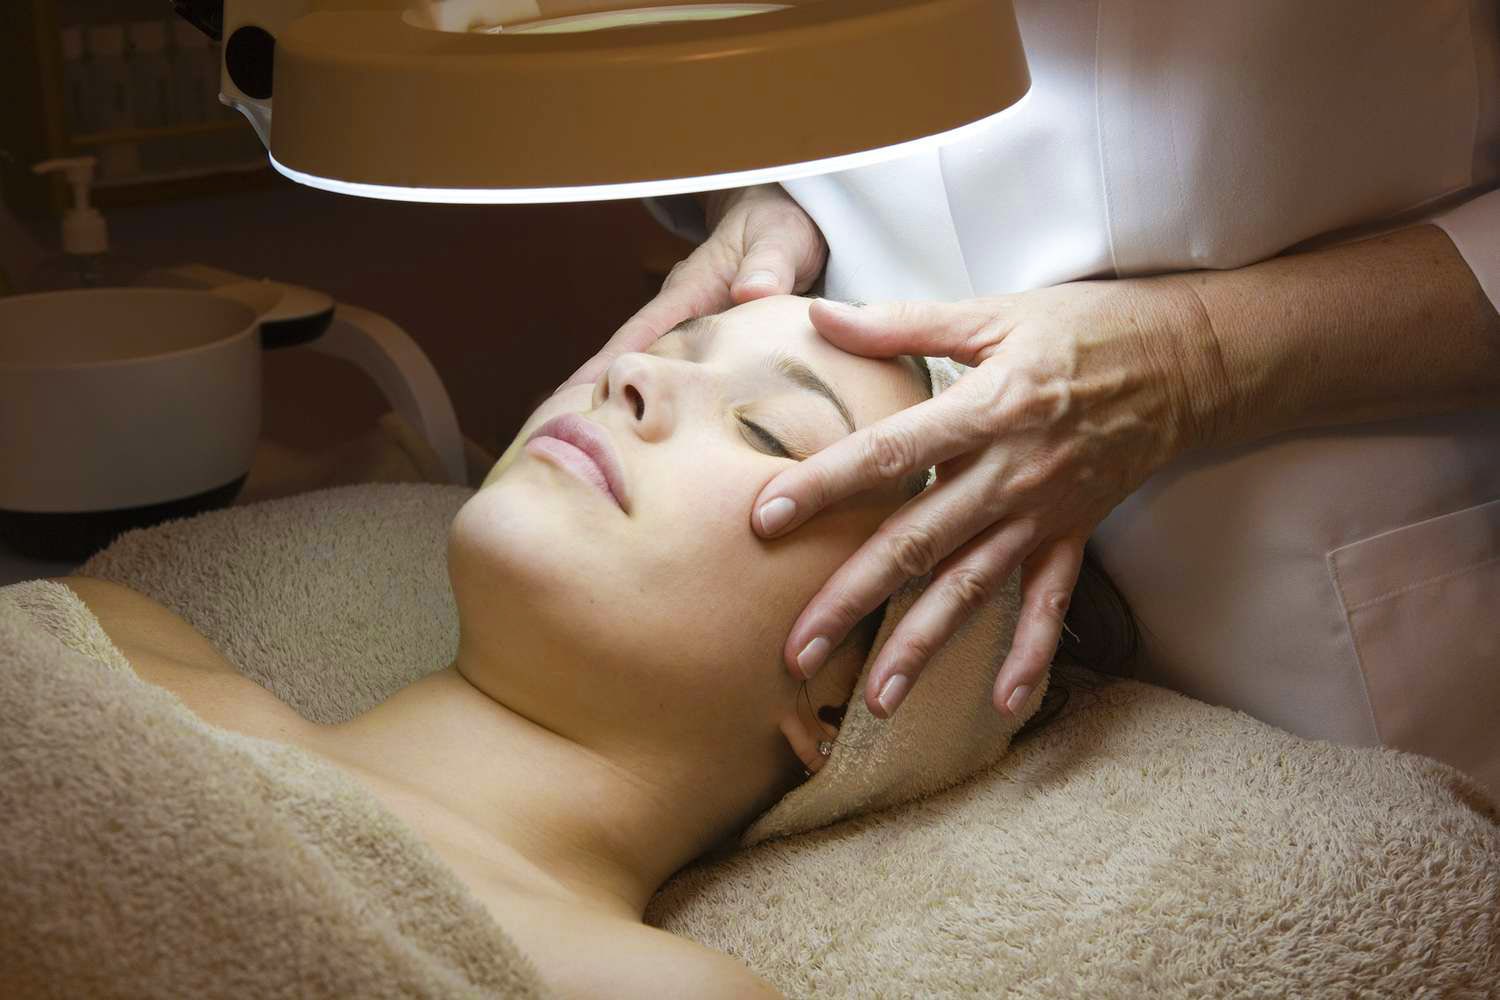 Why Hire a Licensed Master Esthetician?